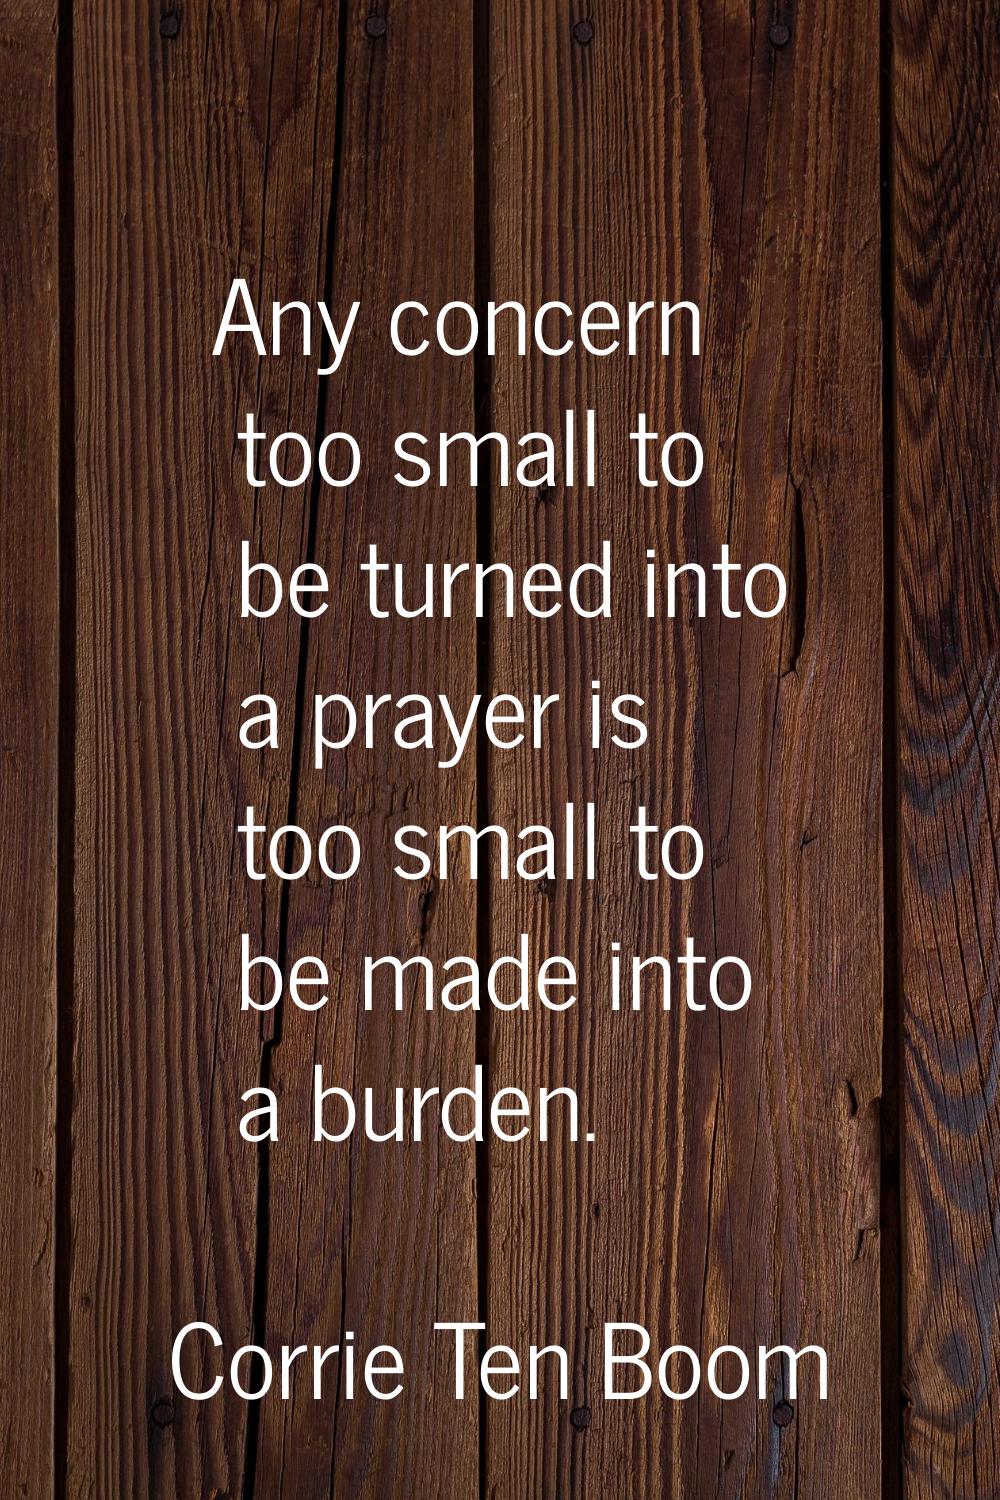 Any concern too small to be turned into a prayer is too small to be made into a burden.